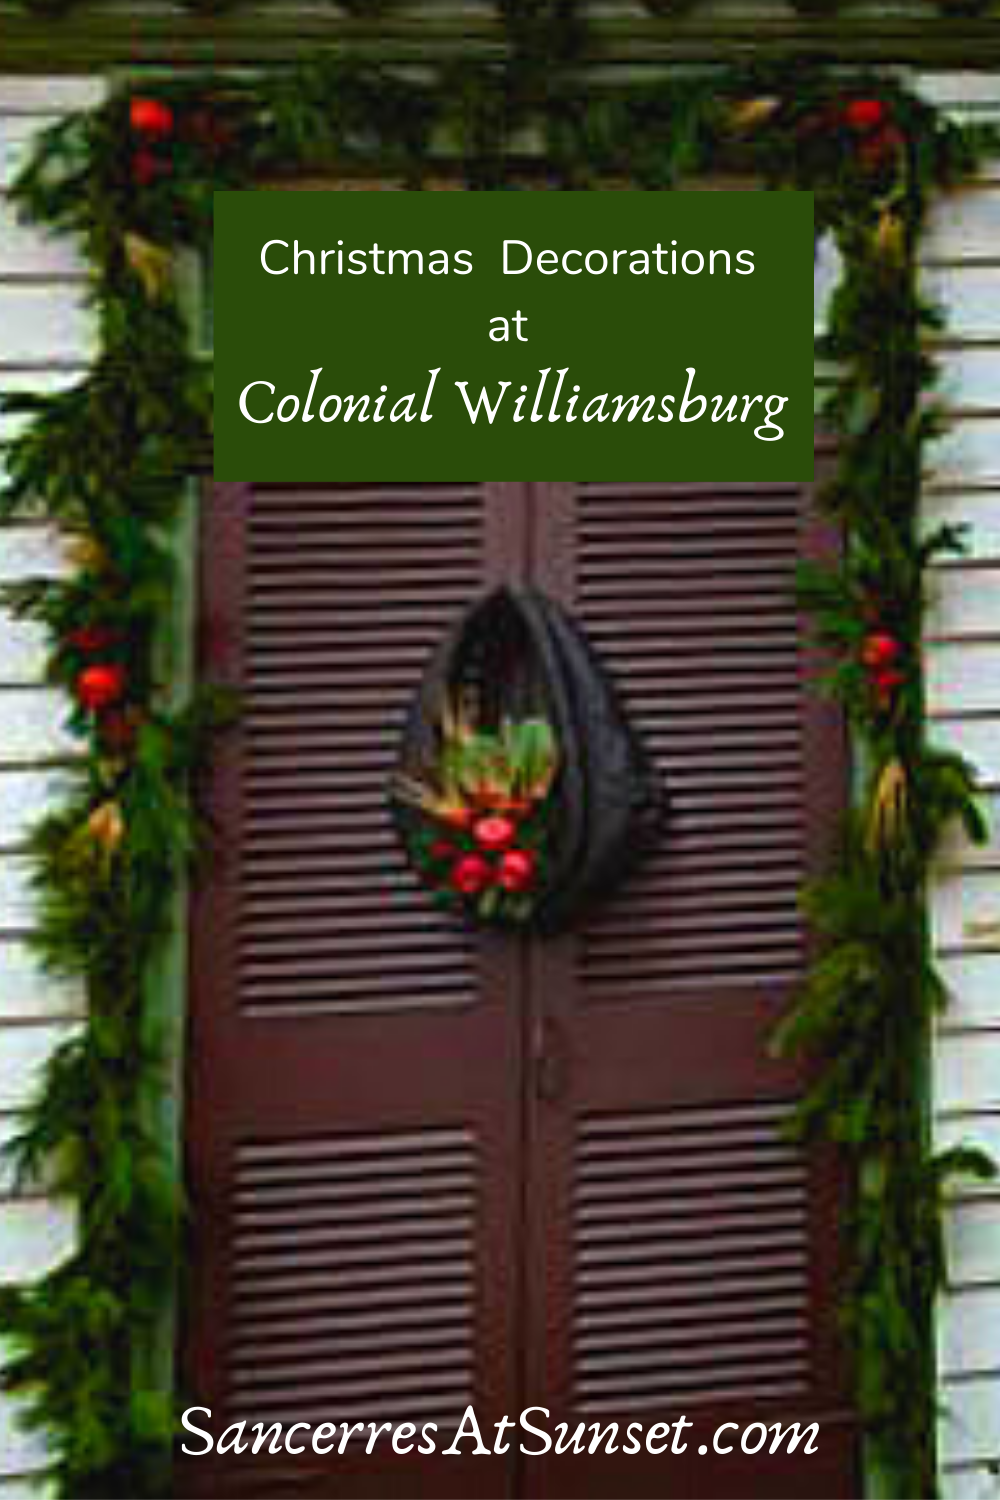 More Christmas Decorations at Colonial Williamsburg